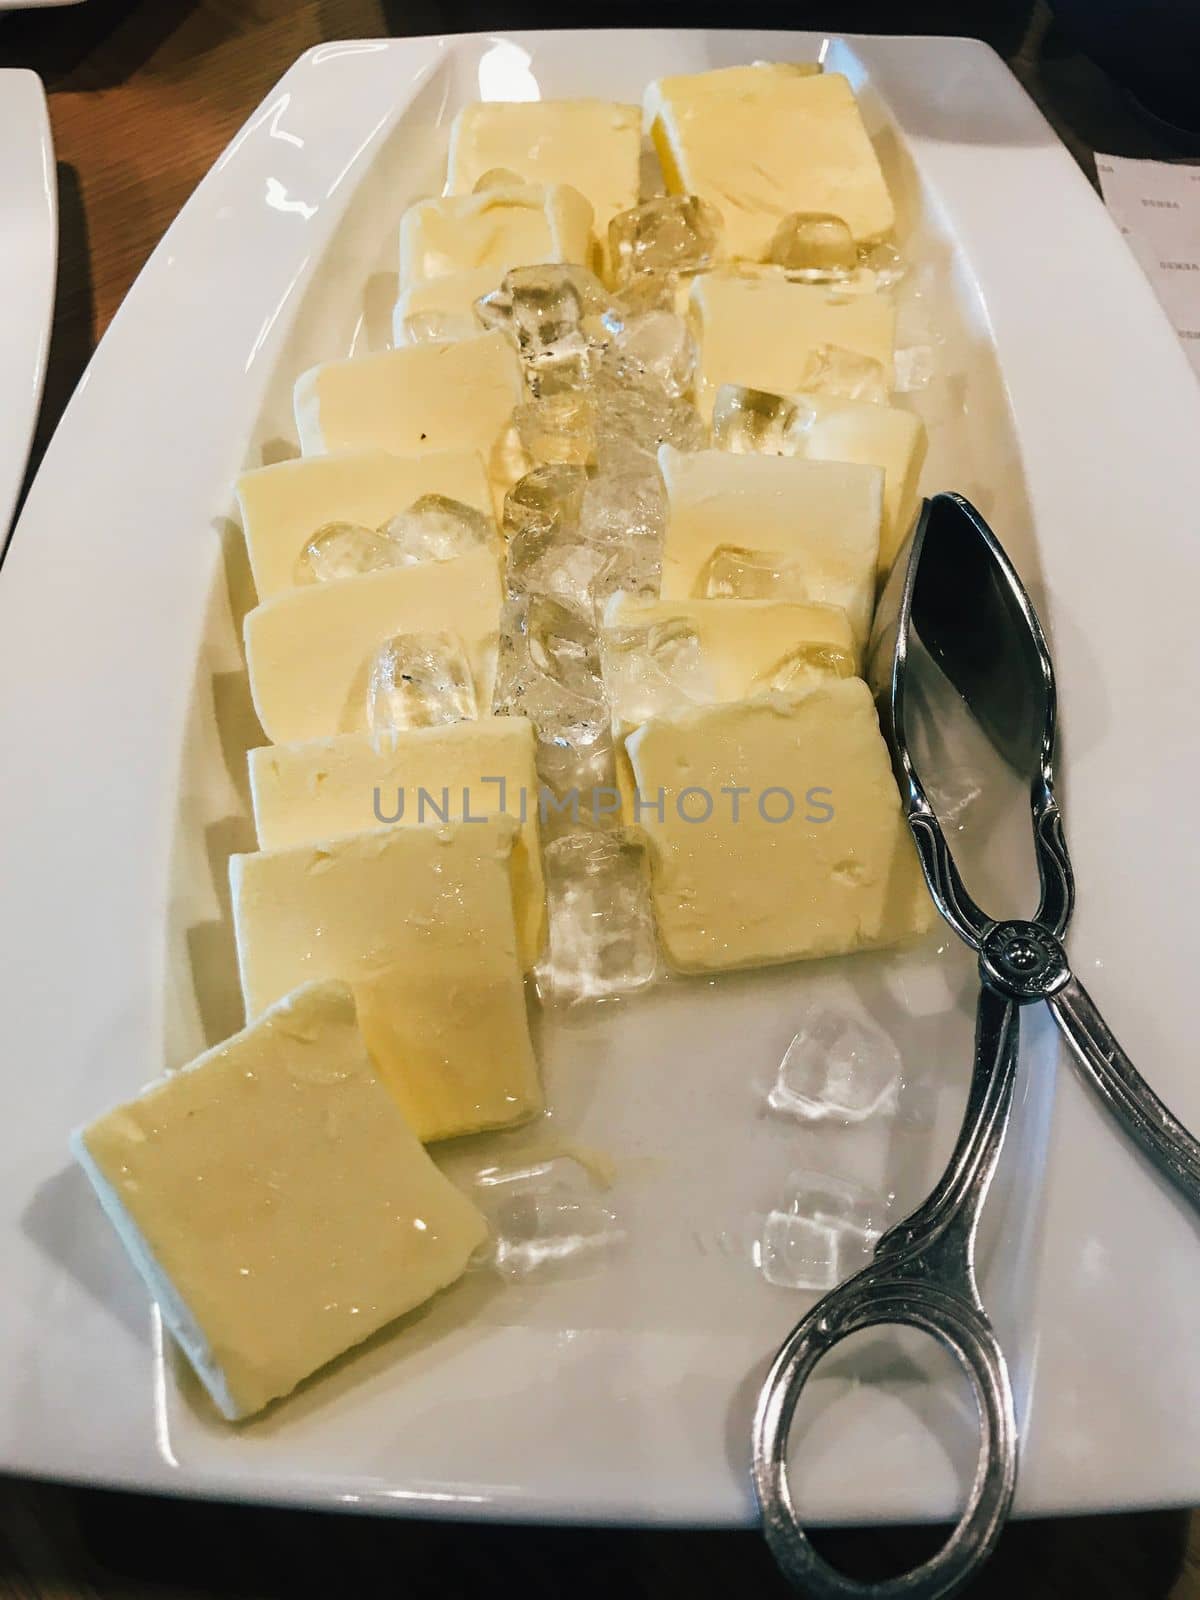 Pieces of fresh butter placing on ice in white plate. Hotel restaurant breakfast buffet.